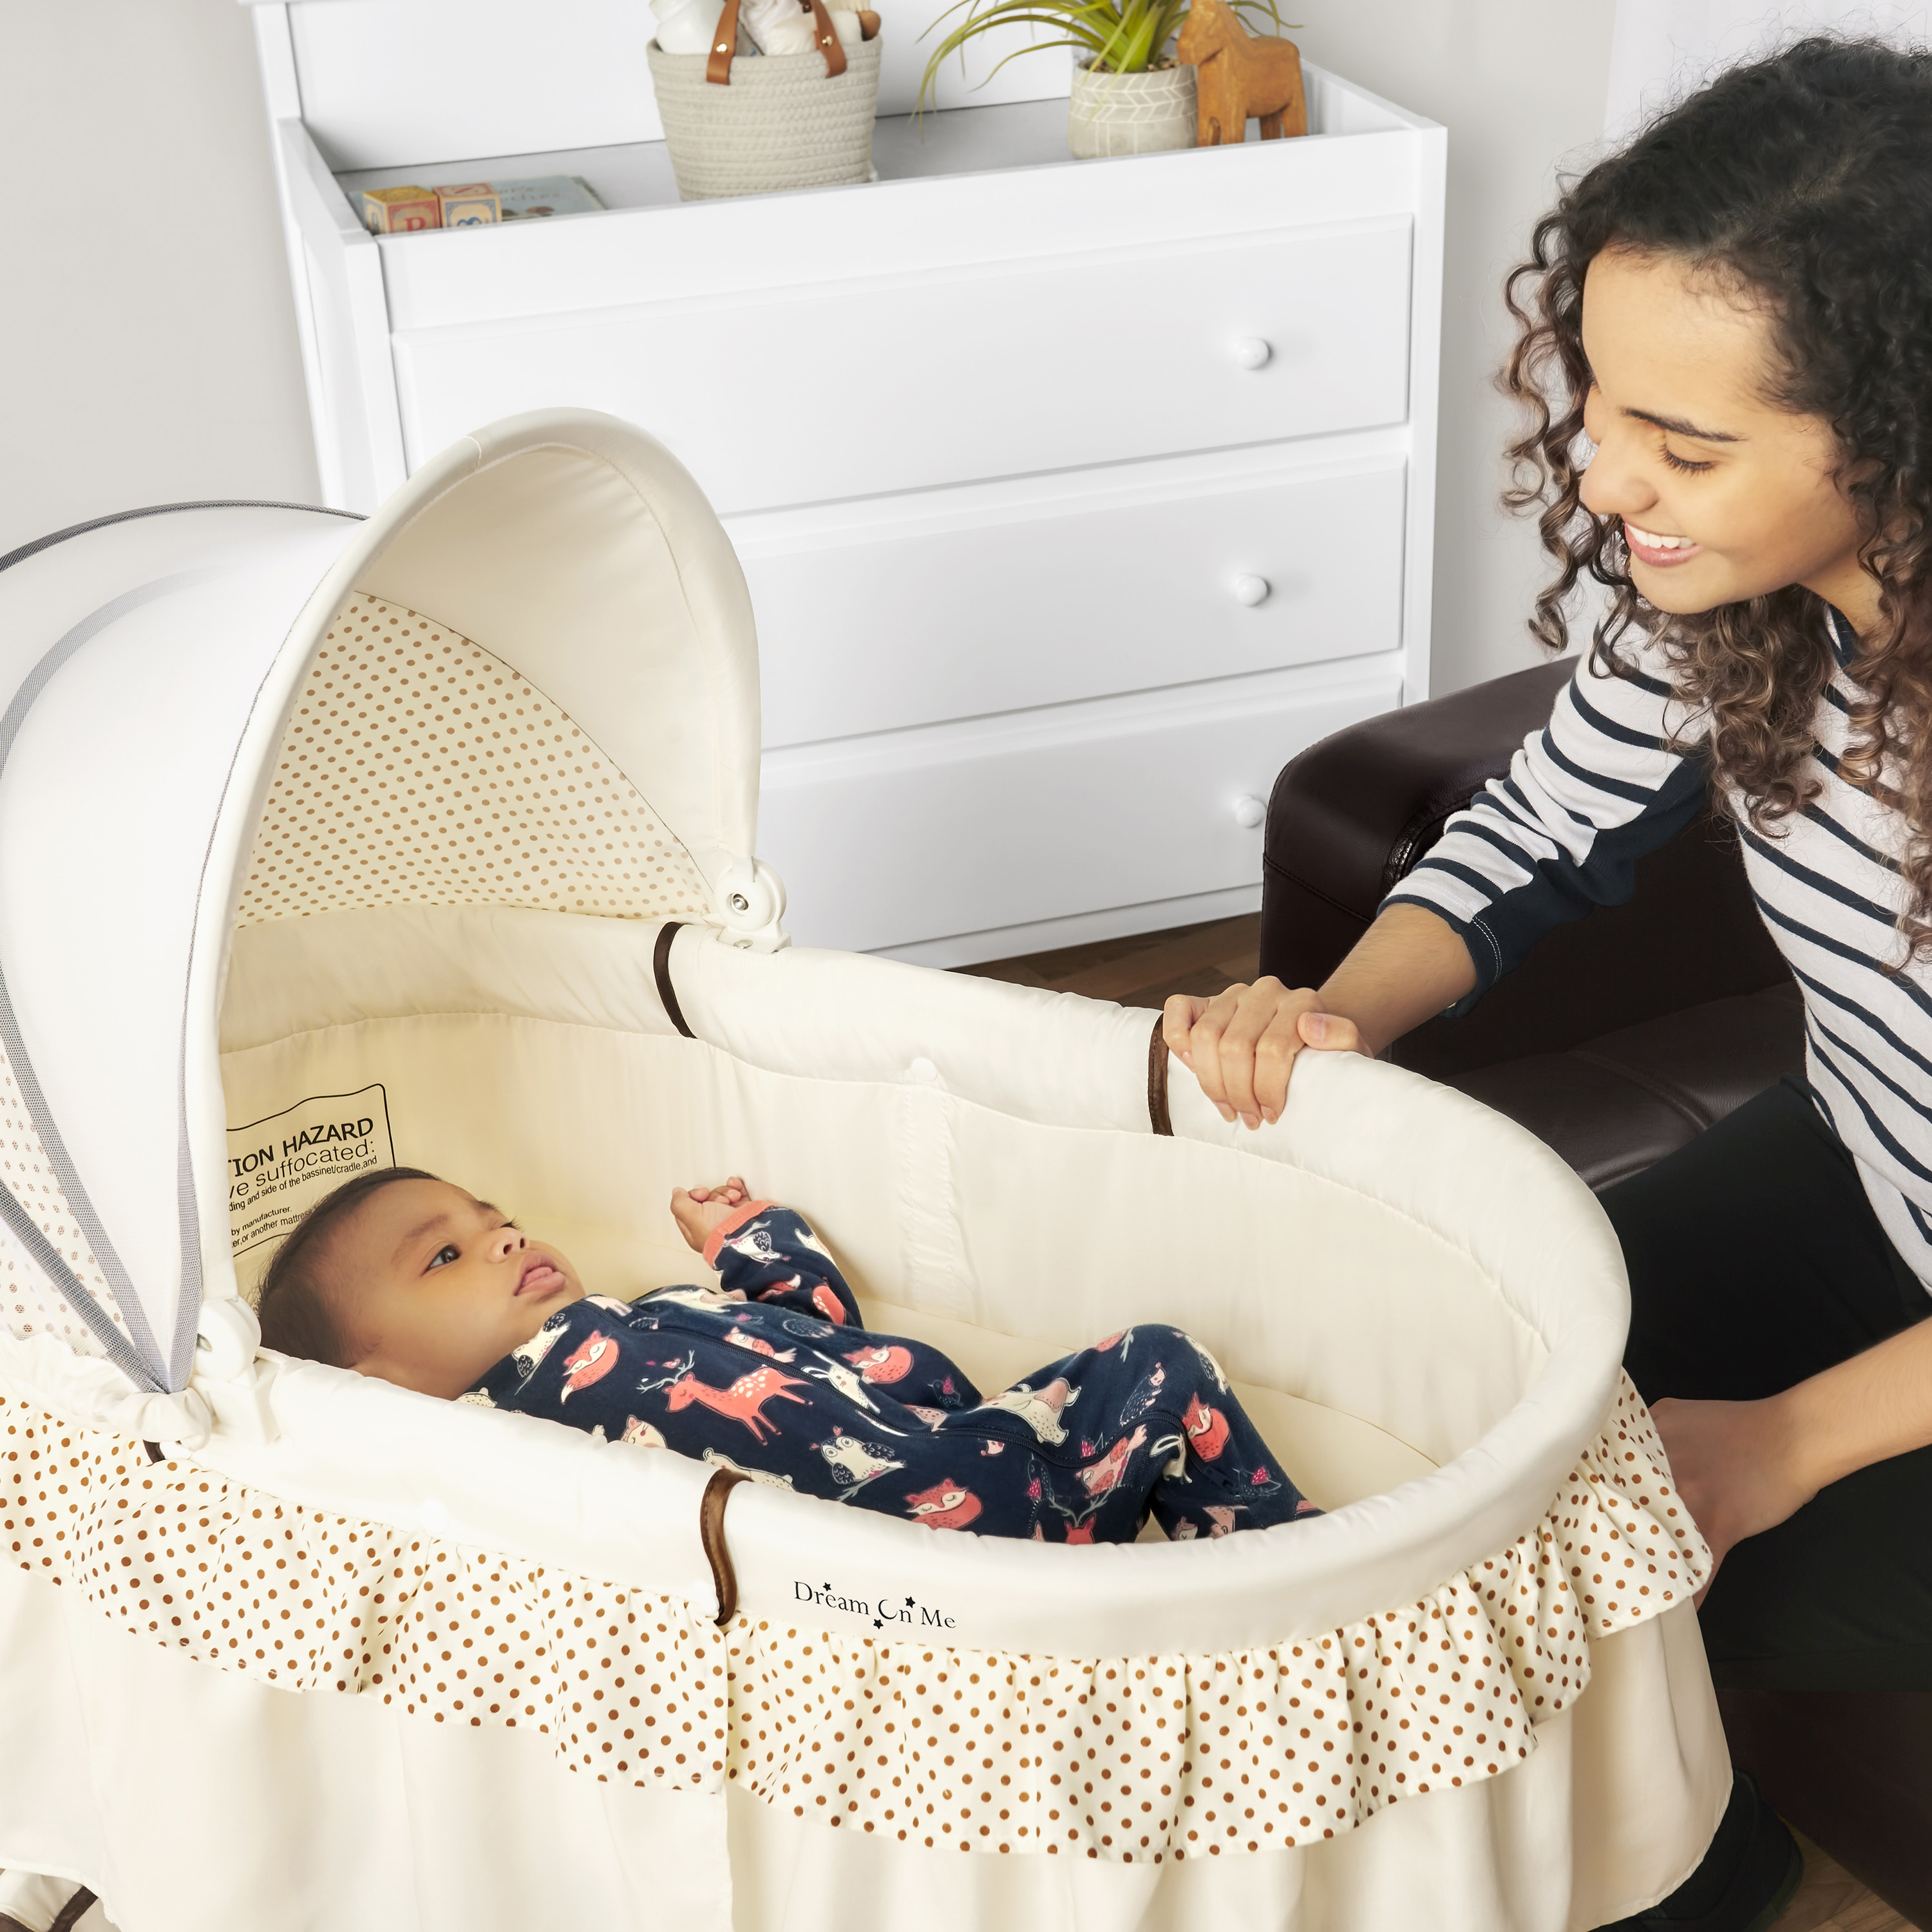 Dream On Me Lacy Portable 2-in-1 Bassinet & Cradle in Cream, Lightweight Baby Bassinet - image 3 of 27